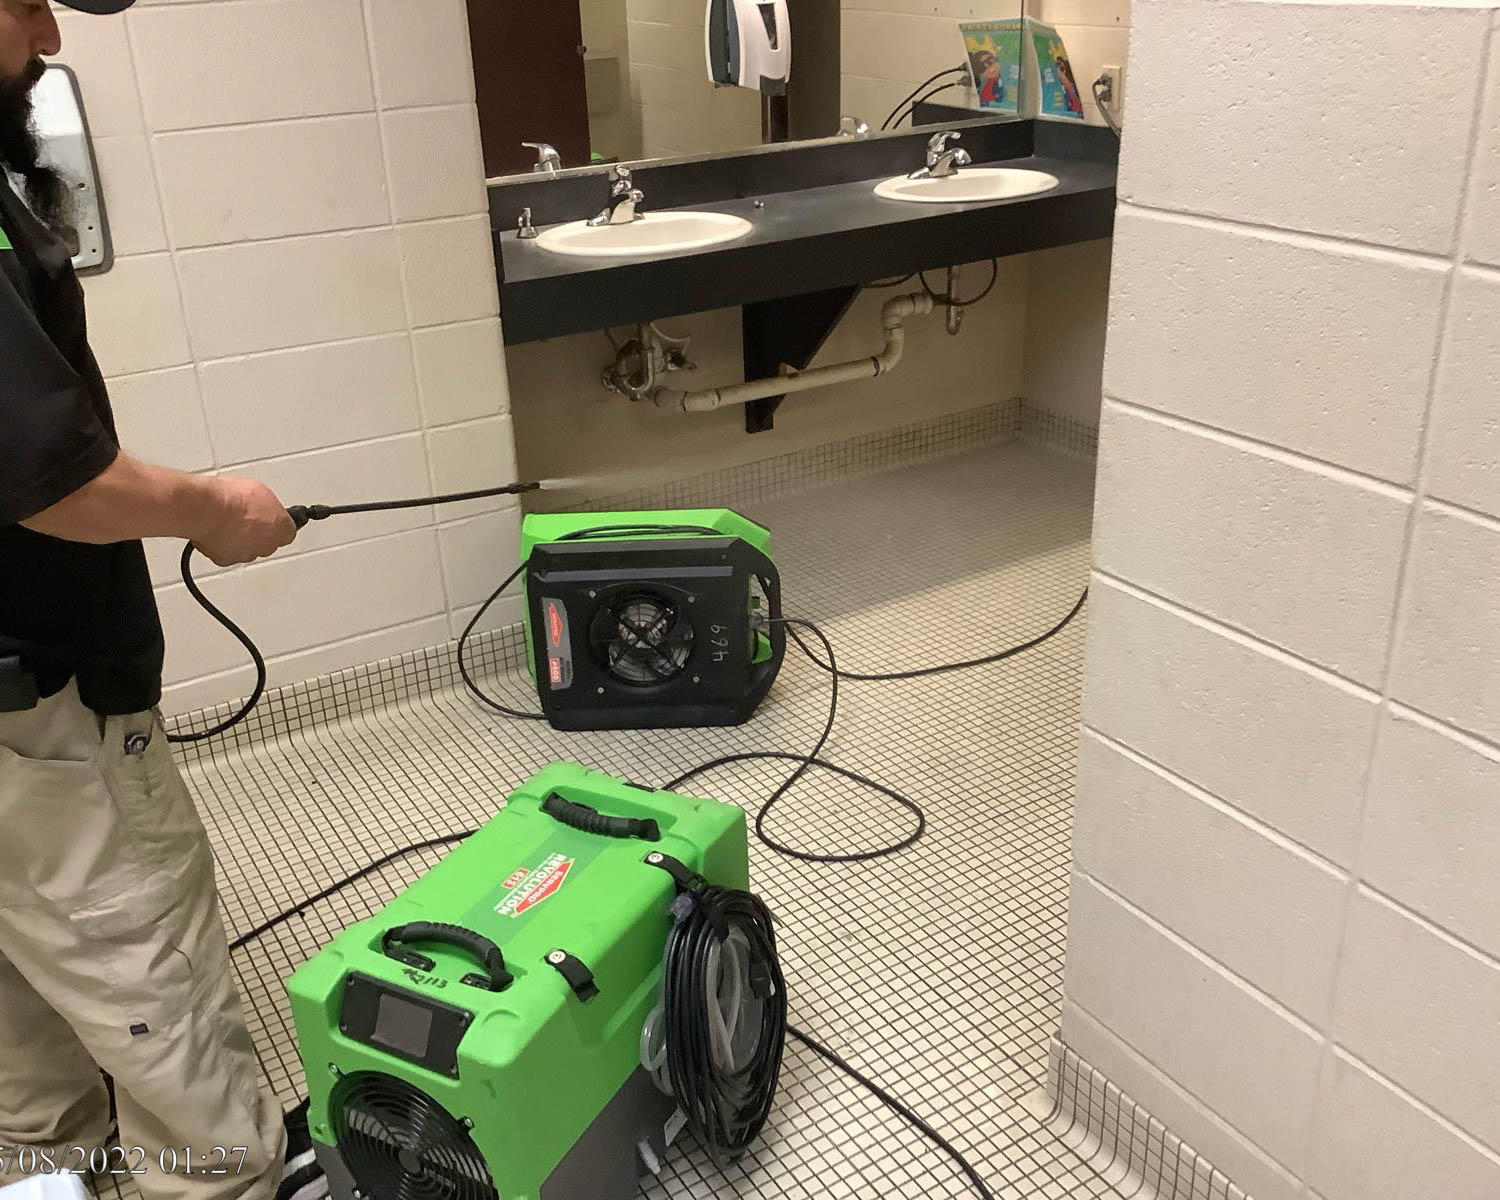 When your commercial business suffers water damage or flooding, know who. to call! SERVPRO of Tyler has the team and equipment needed for commercial water restoration.